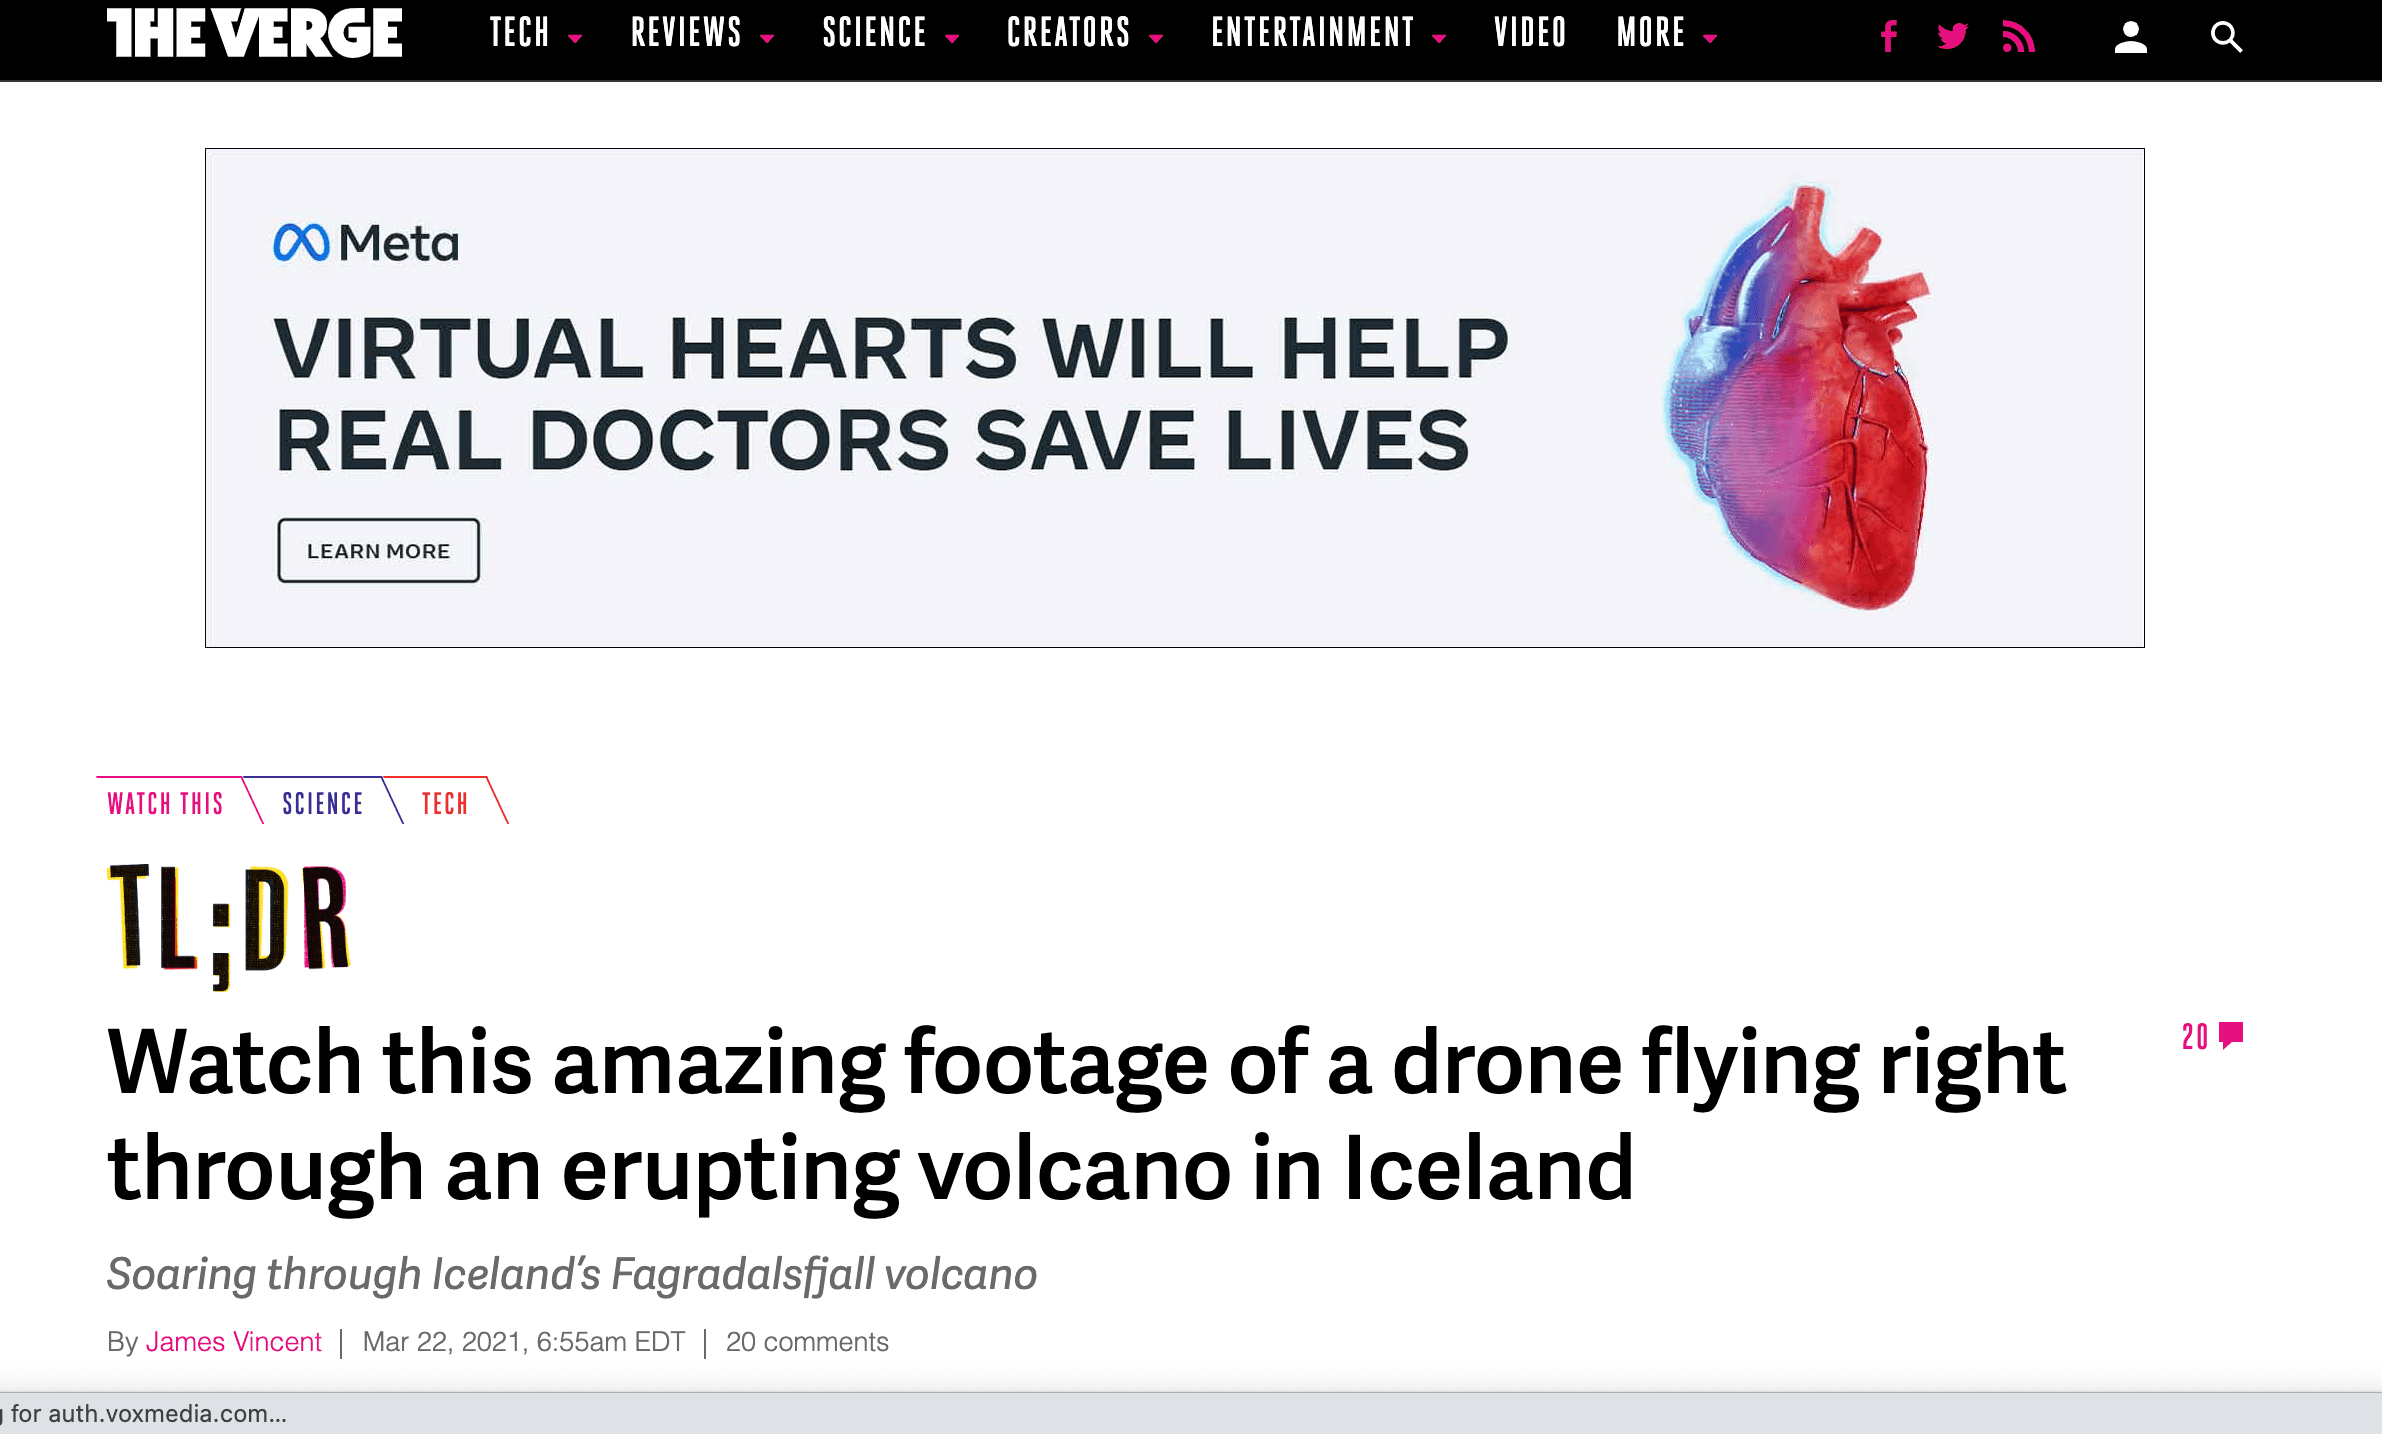 Example of an emotional headline from The Verge